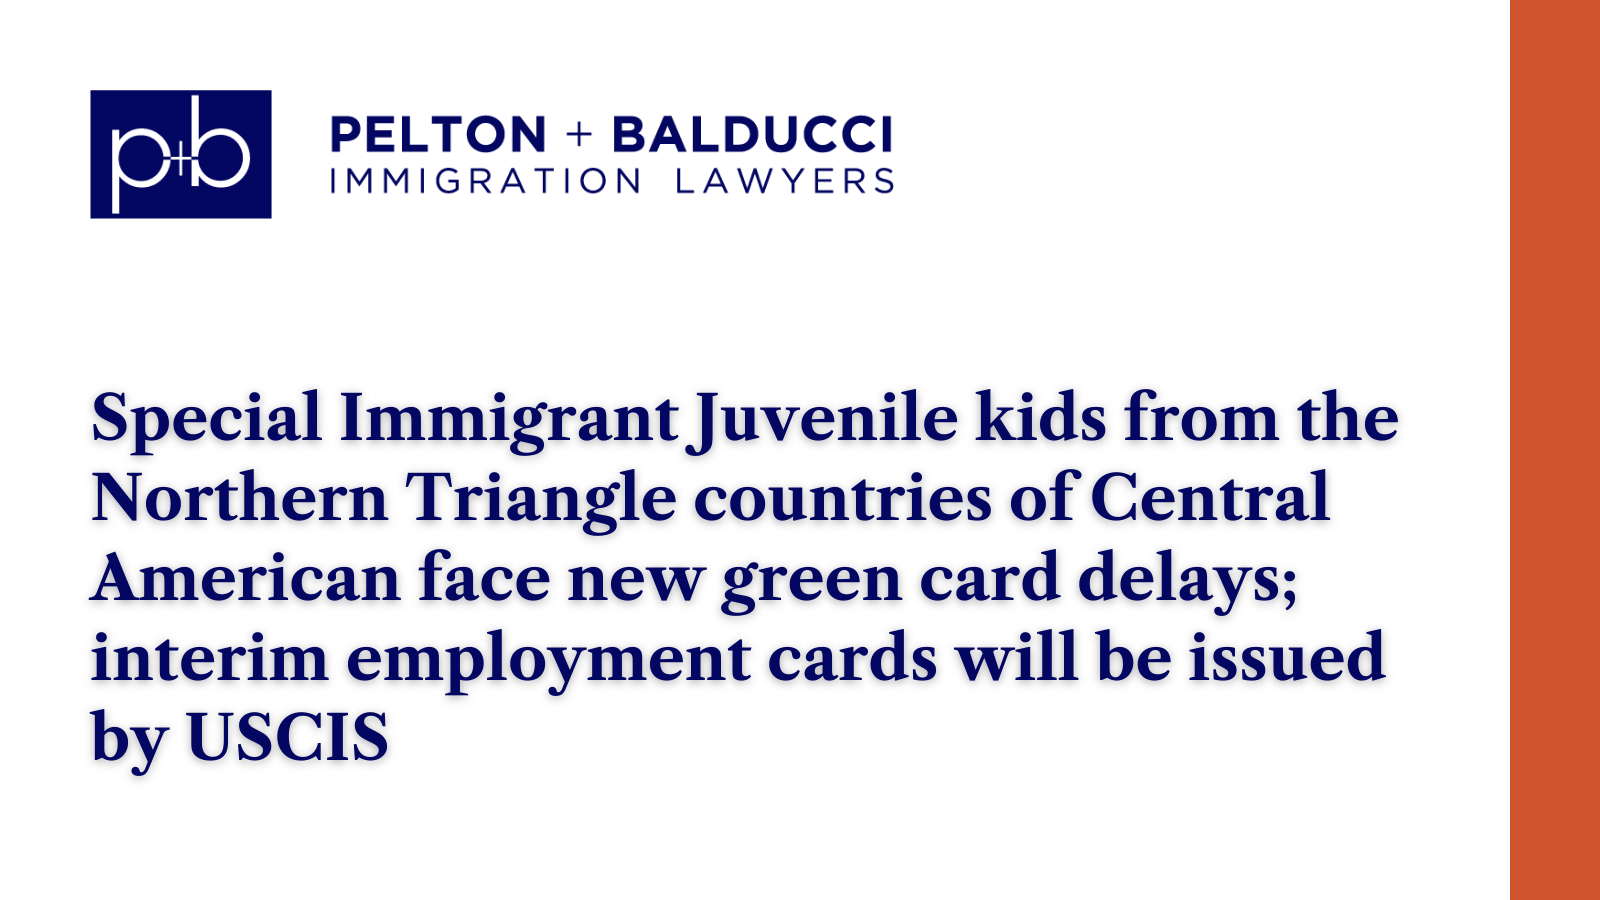 Central American face new green card delays - New Orleans Immigration Lawyers - Pelton Balducci